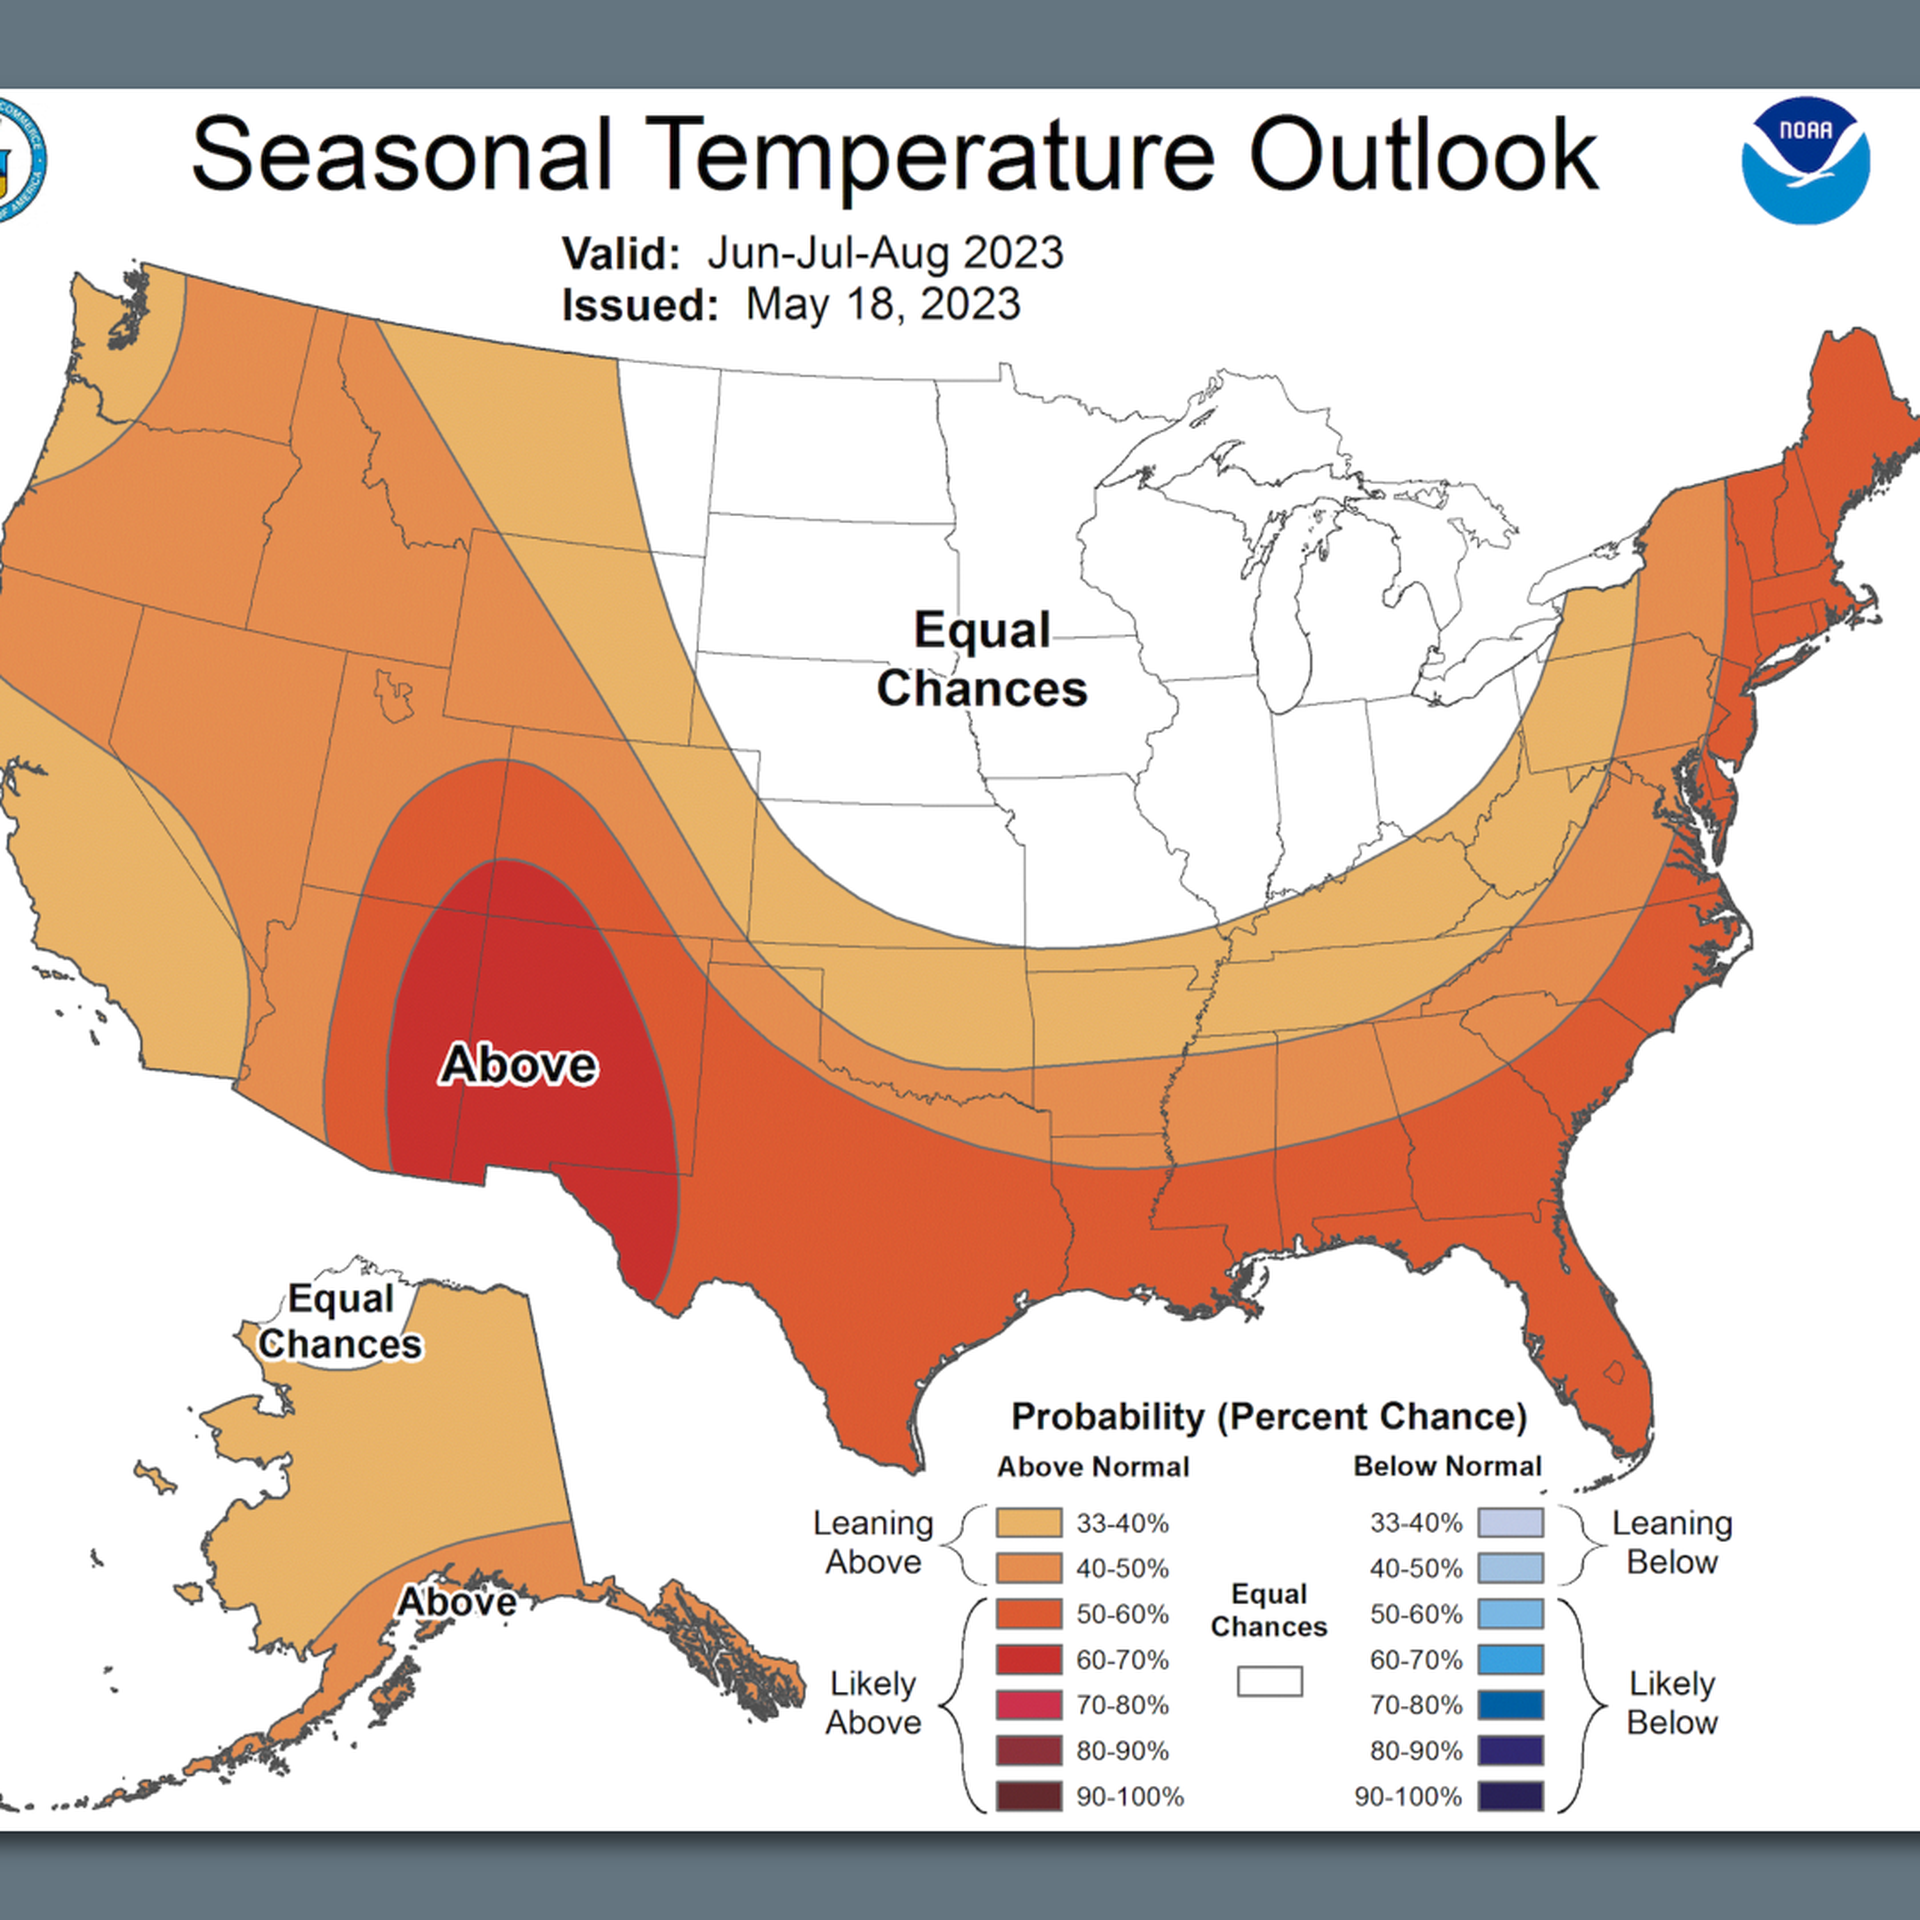 Map showing seasonal temperature trends likely during summer 2023 across the U.S. 